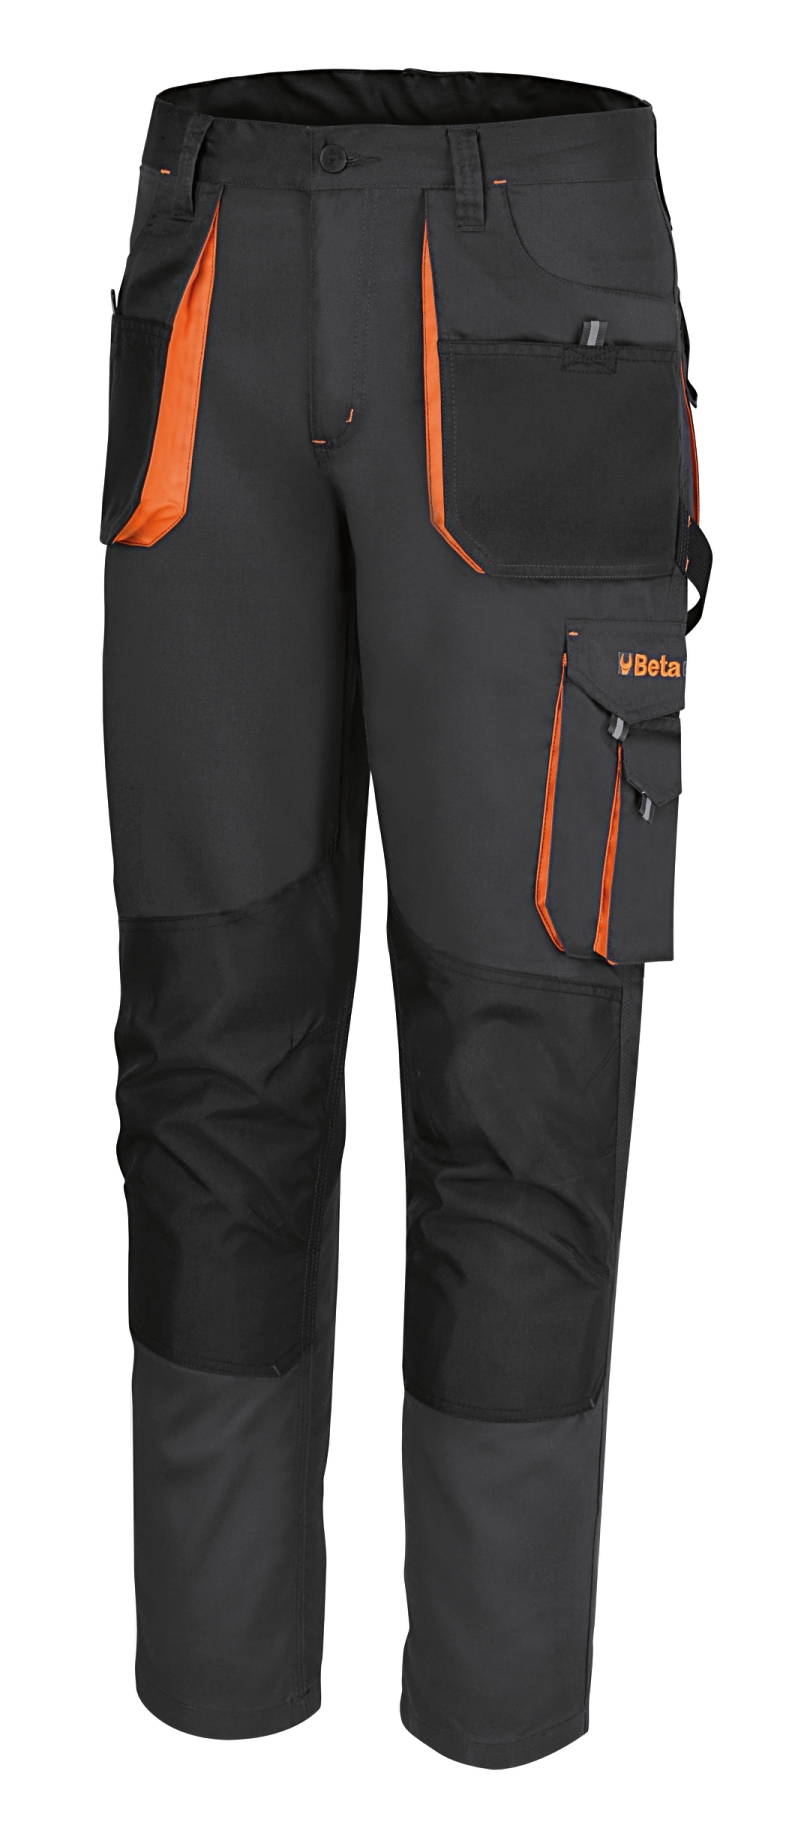 Work trousers New design - Improved fit - Beta Tools UK